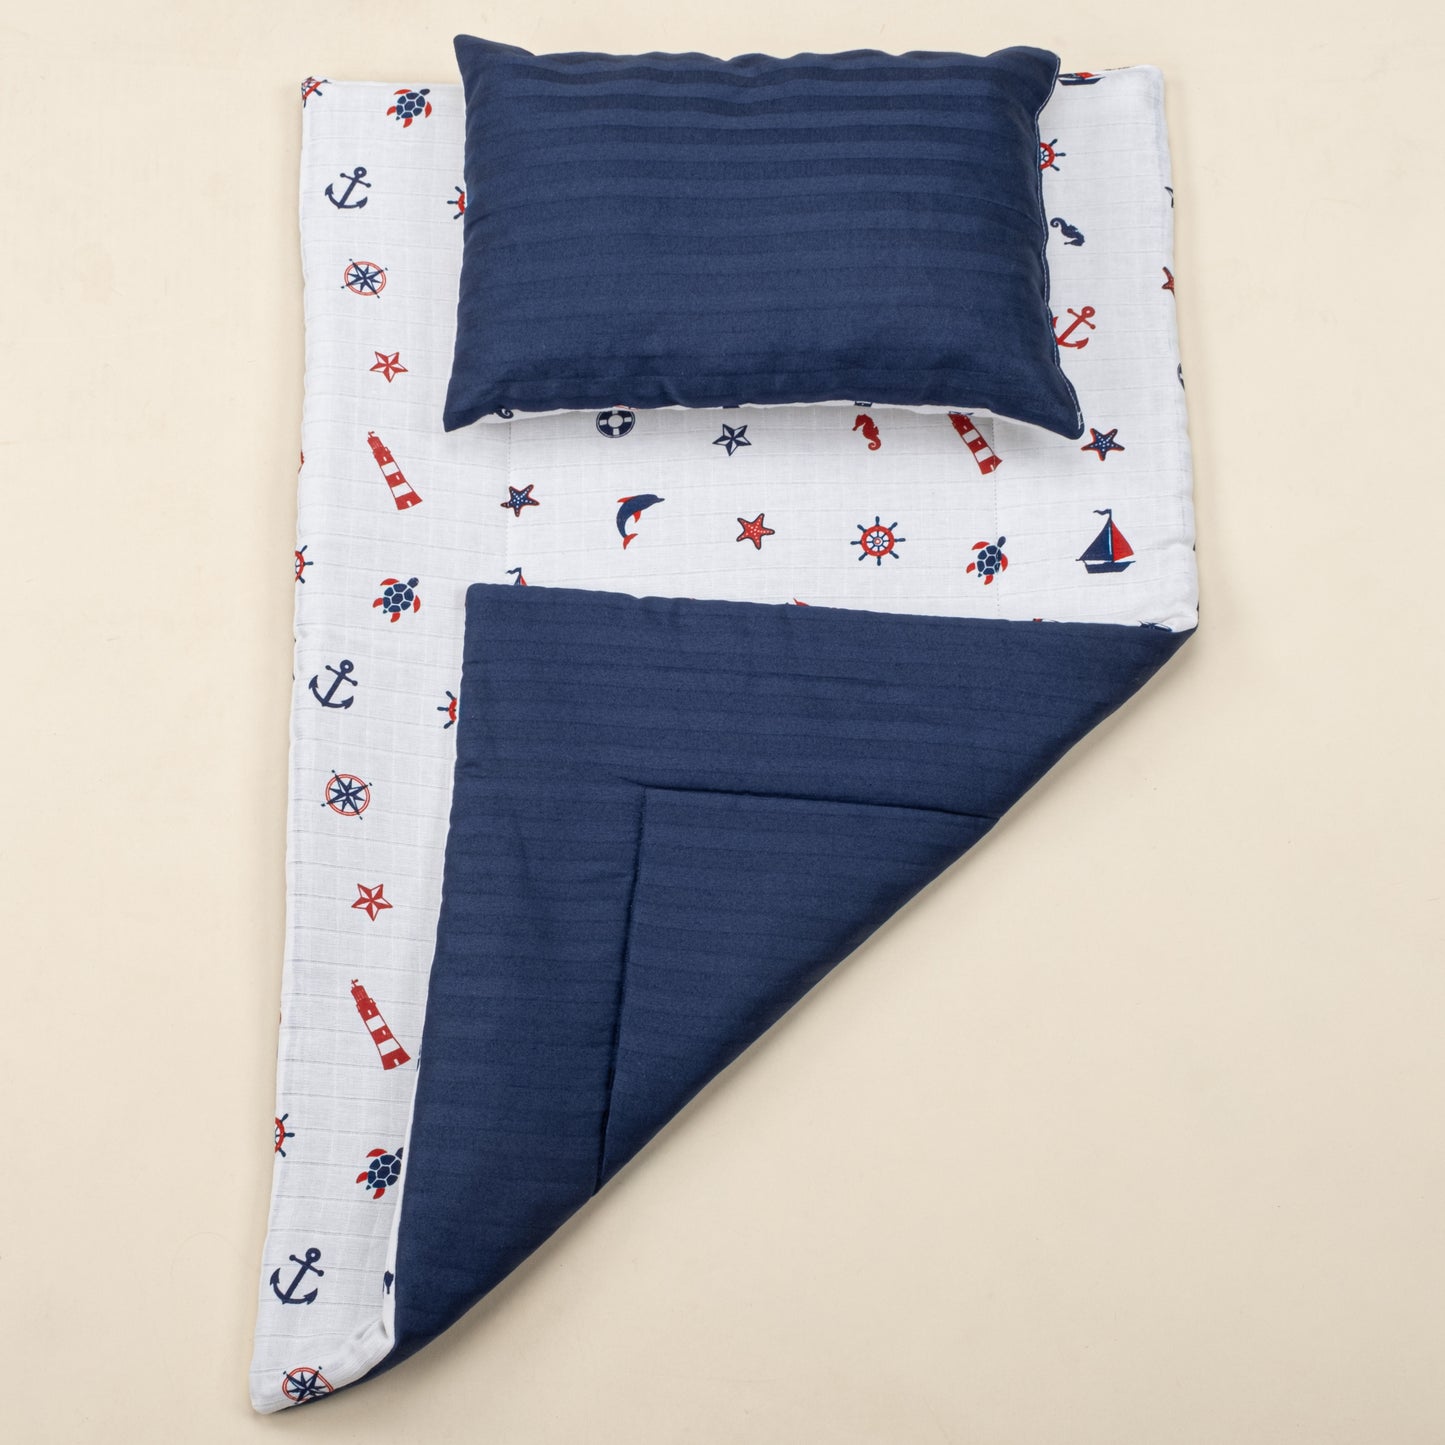 Double Side Changing Pad - Navy Blue Satin - Navy